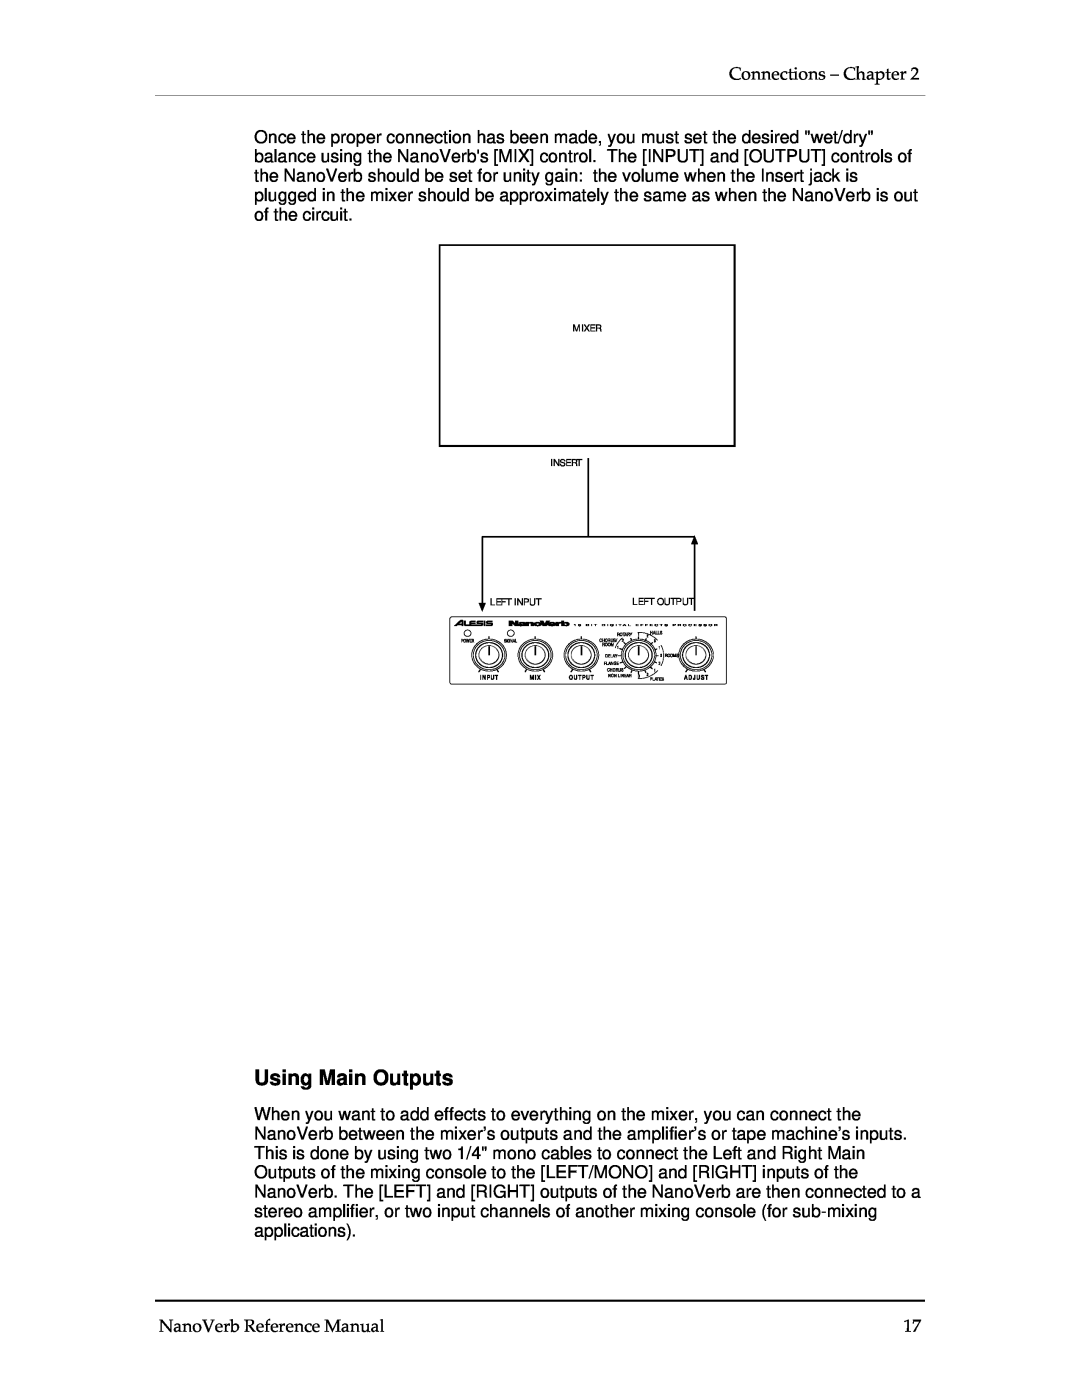 Alesis Stereo Amplifier manual Using Main Outputs, Connections - Chapter, NanoVerb Reference Manual 